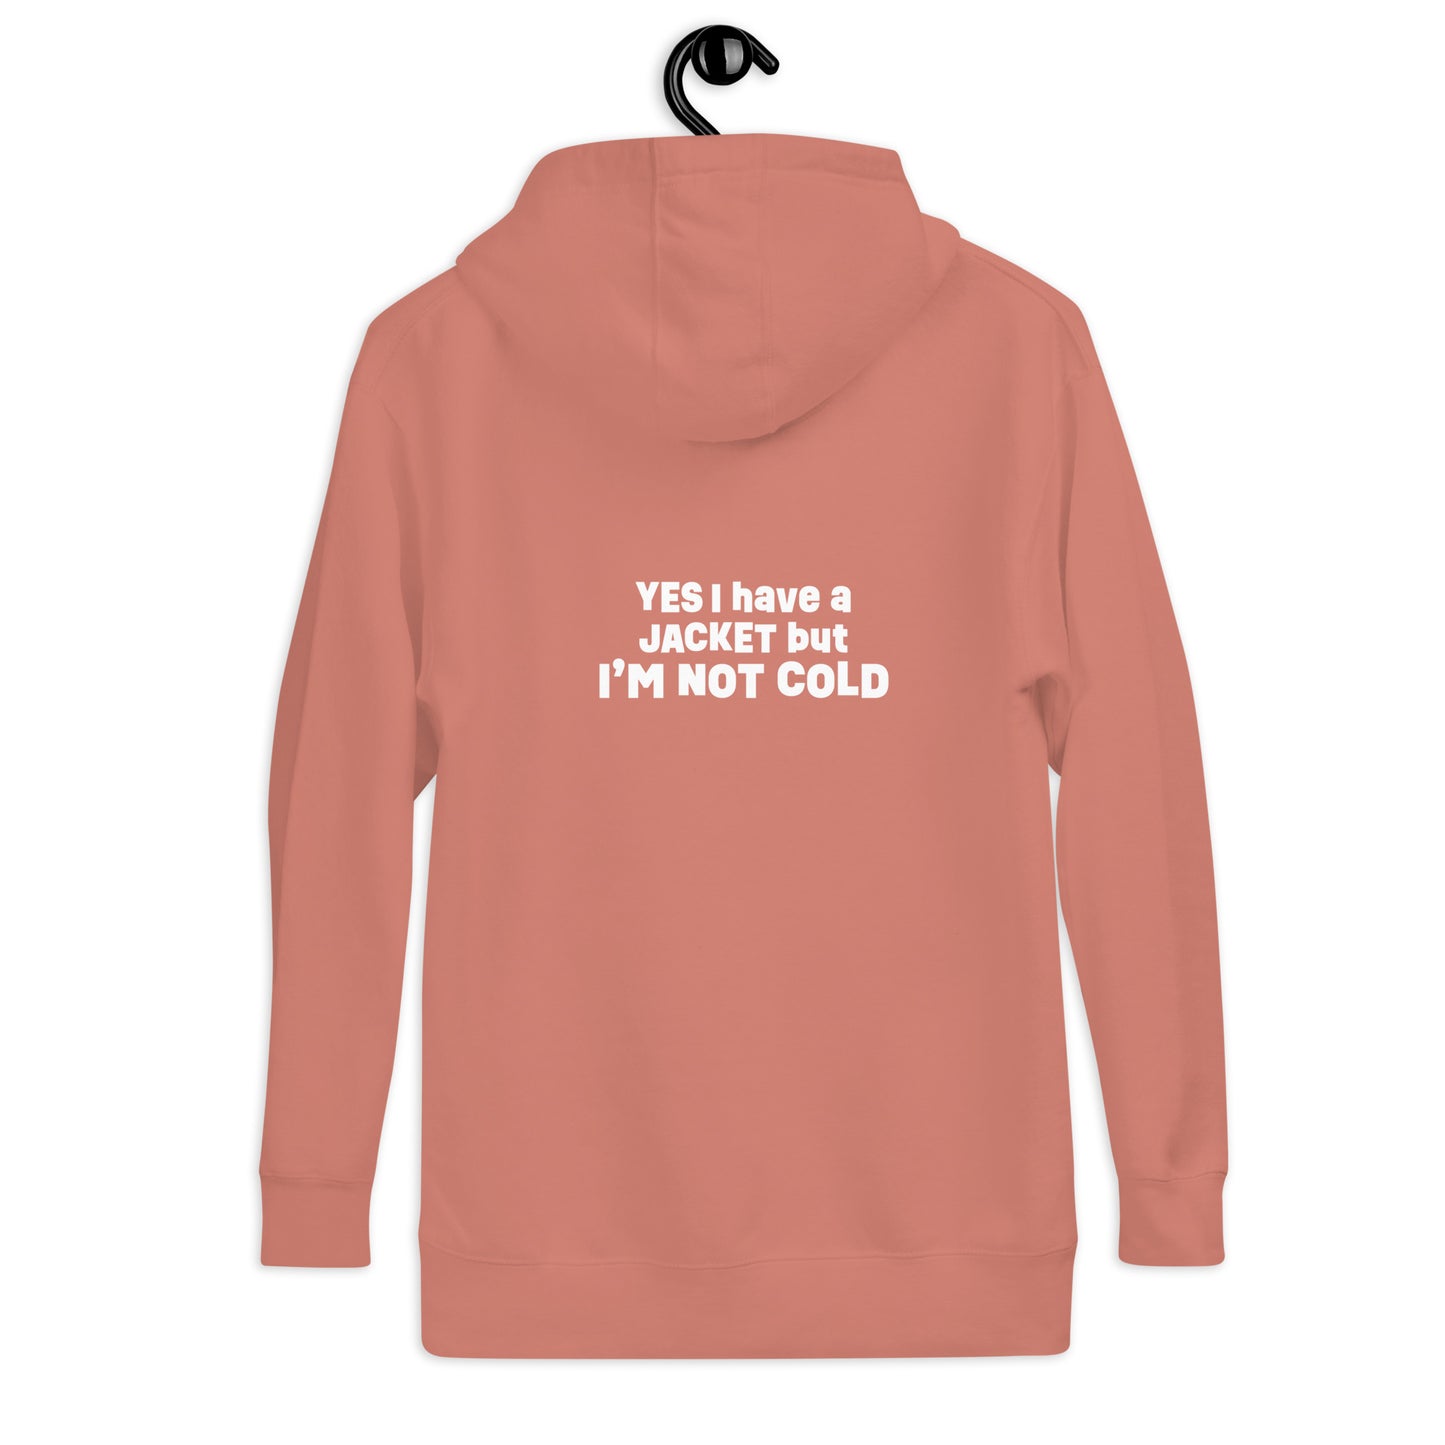 I'm Not Cold - hoodie (adult sizes)